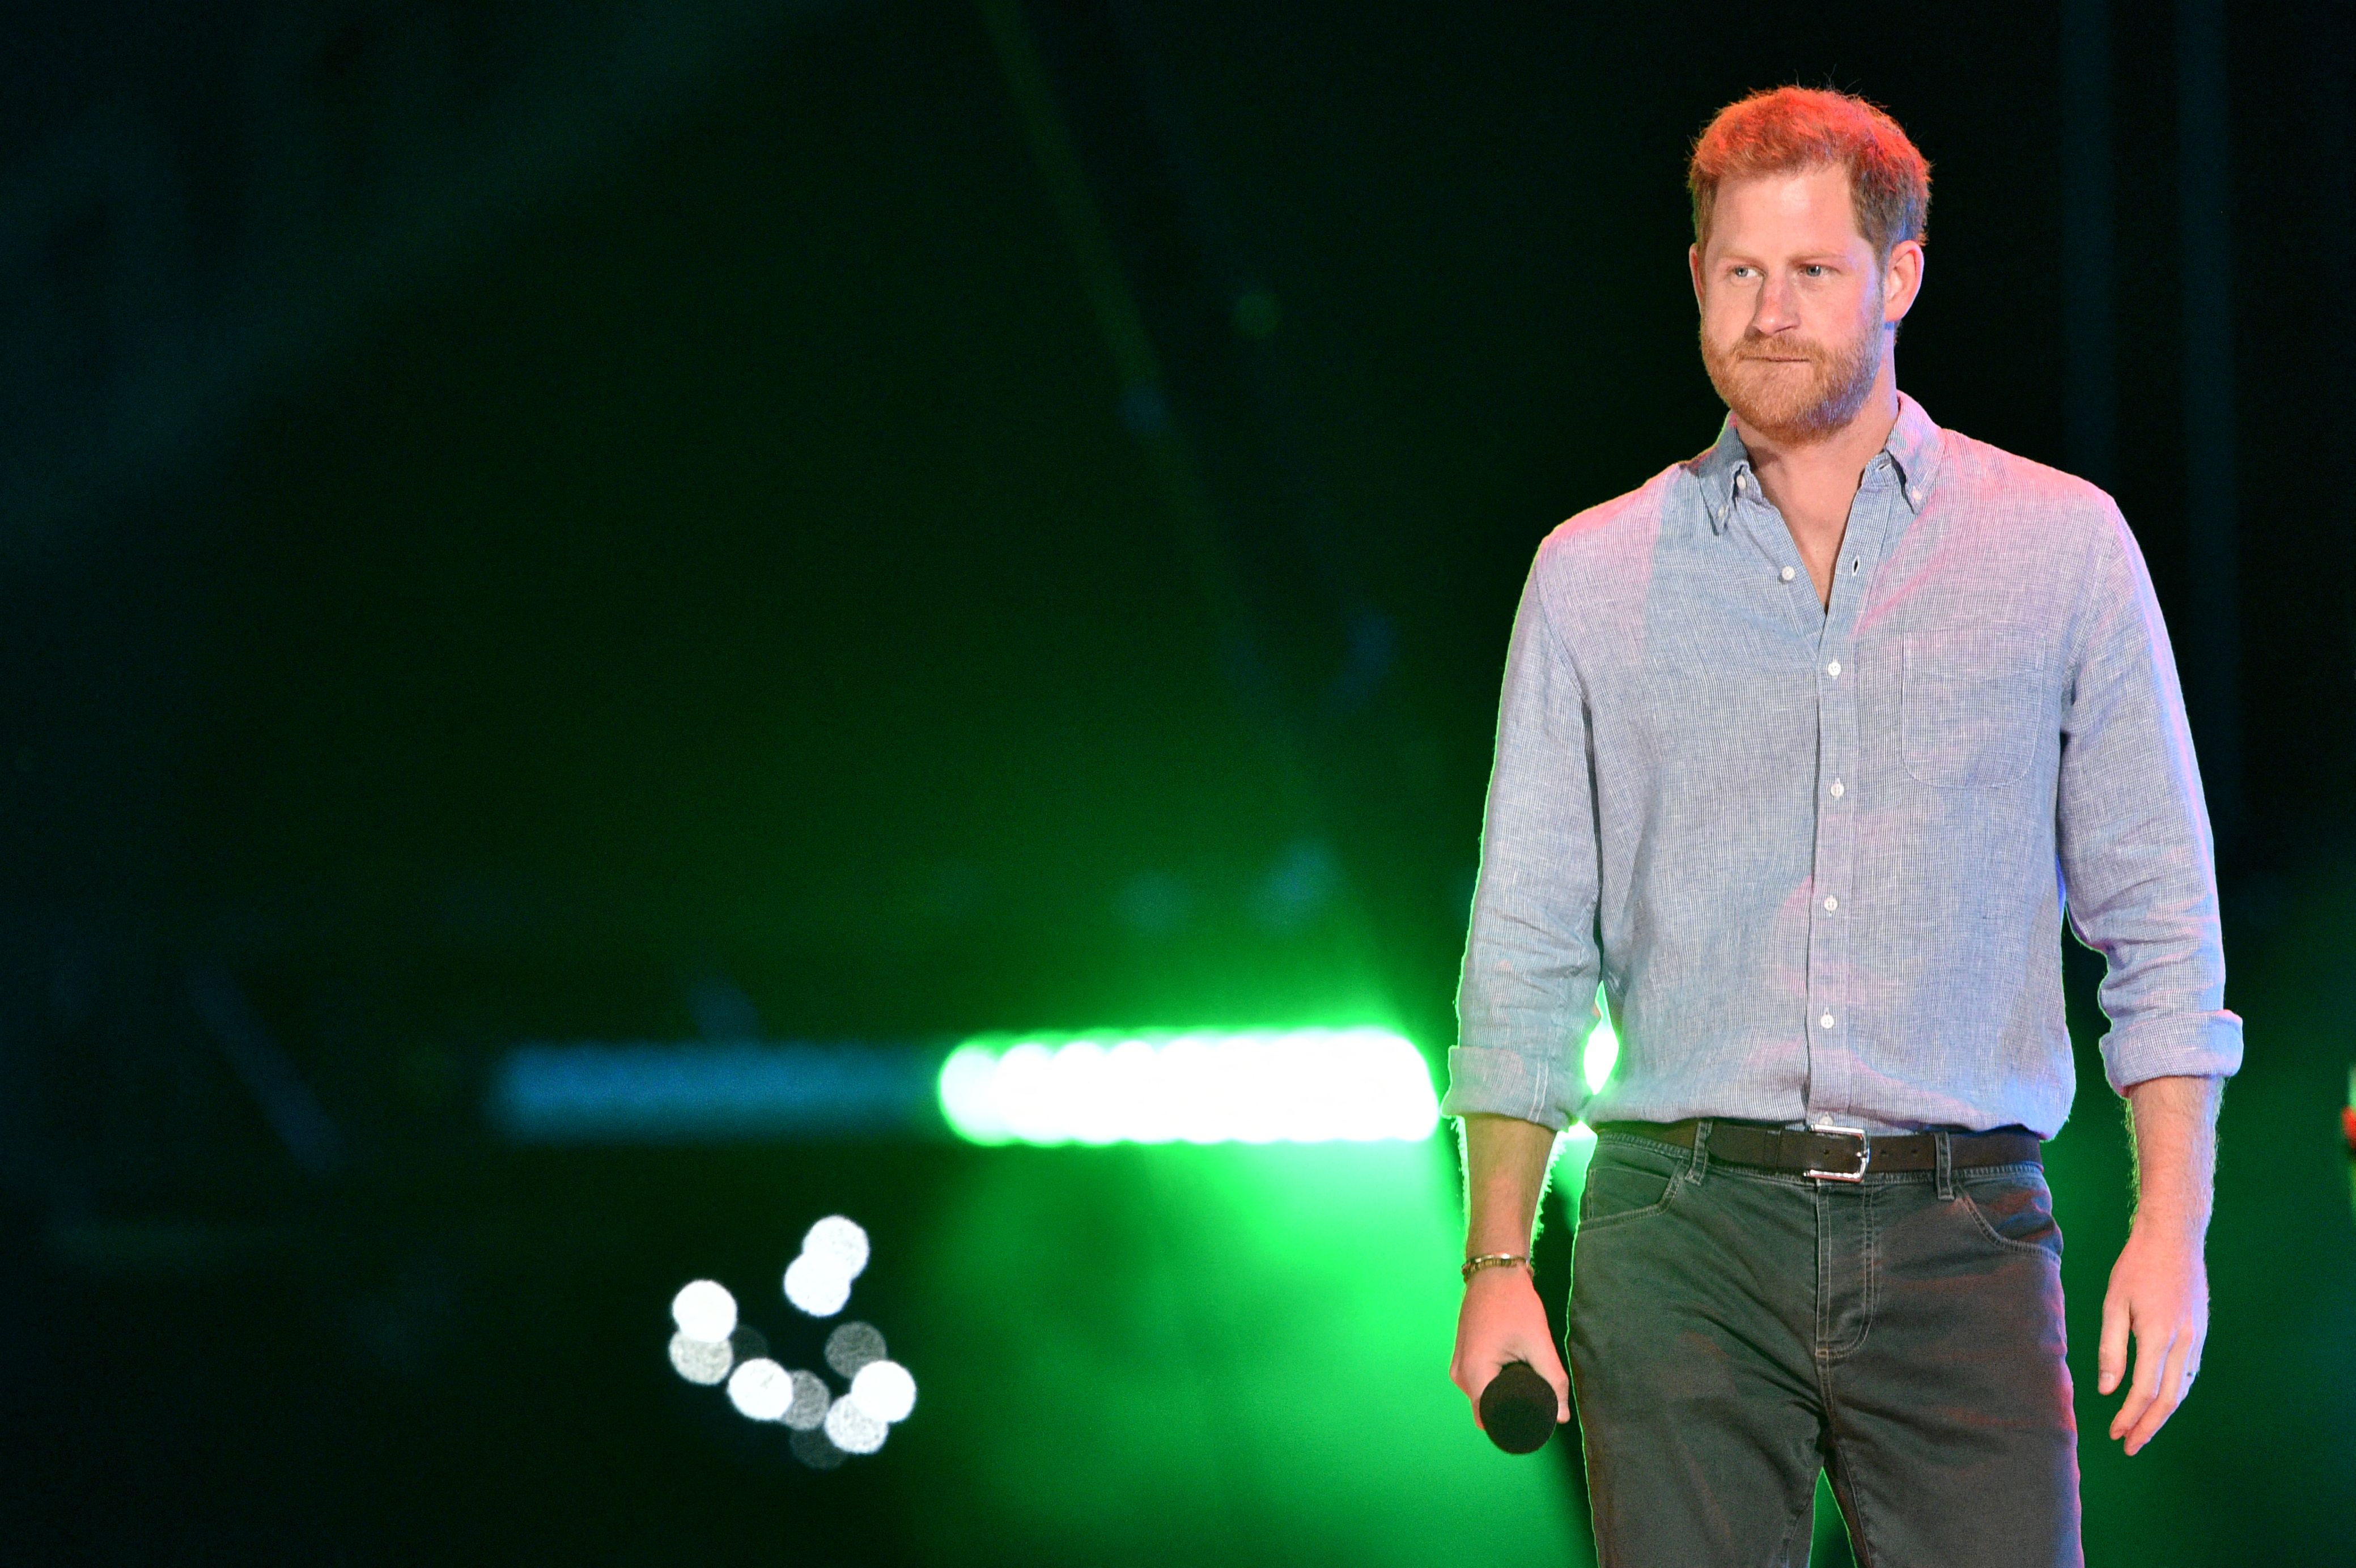 Prince Harry appearing onstage and dressed down at the Vax Live fundraising concert